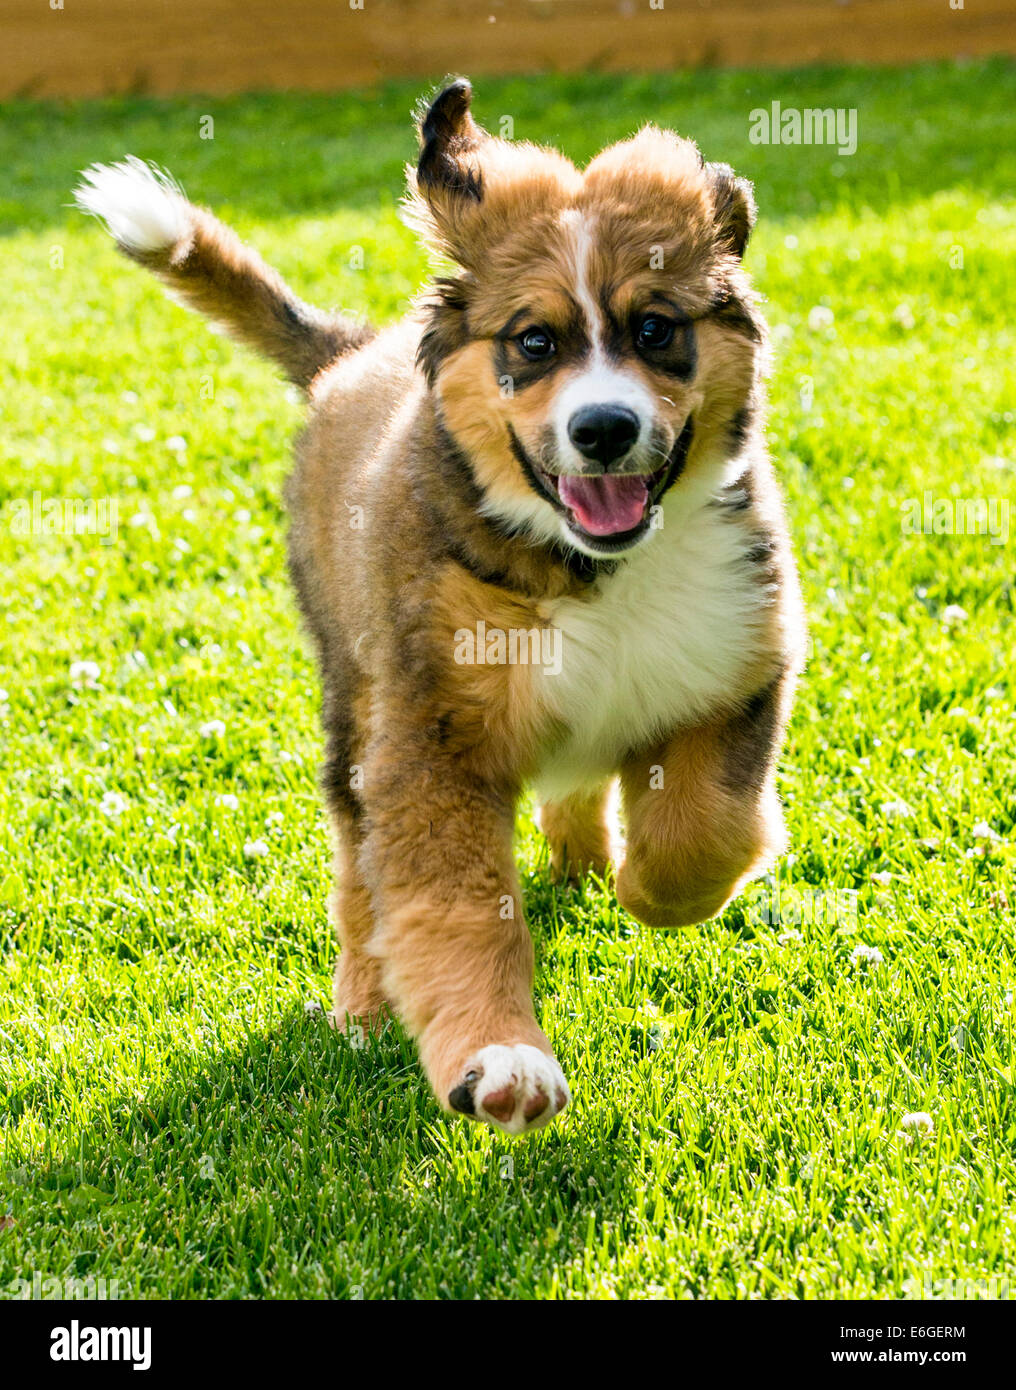 Twelve week old Bernese Mountain Dog, Great Pyrenees, mix breed, puppy running on grass Stock Photo